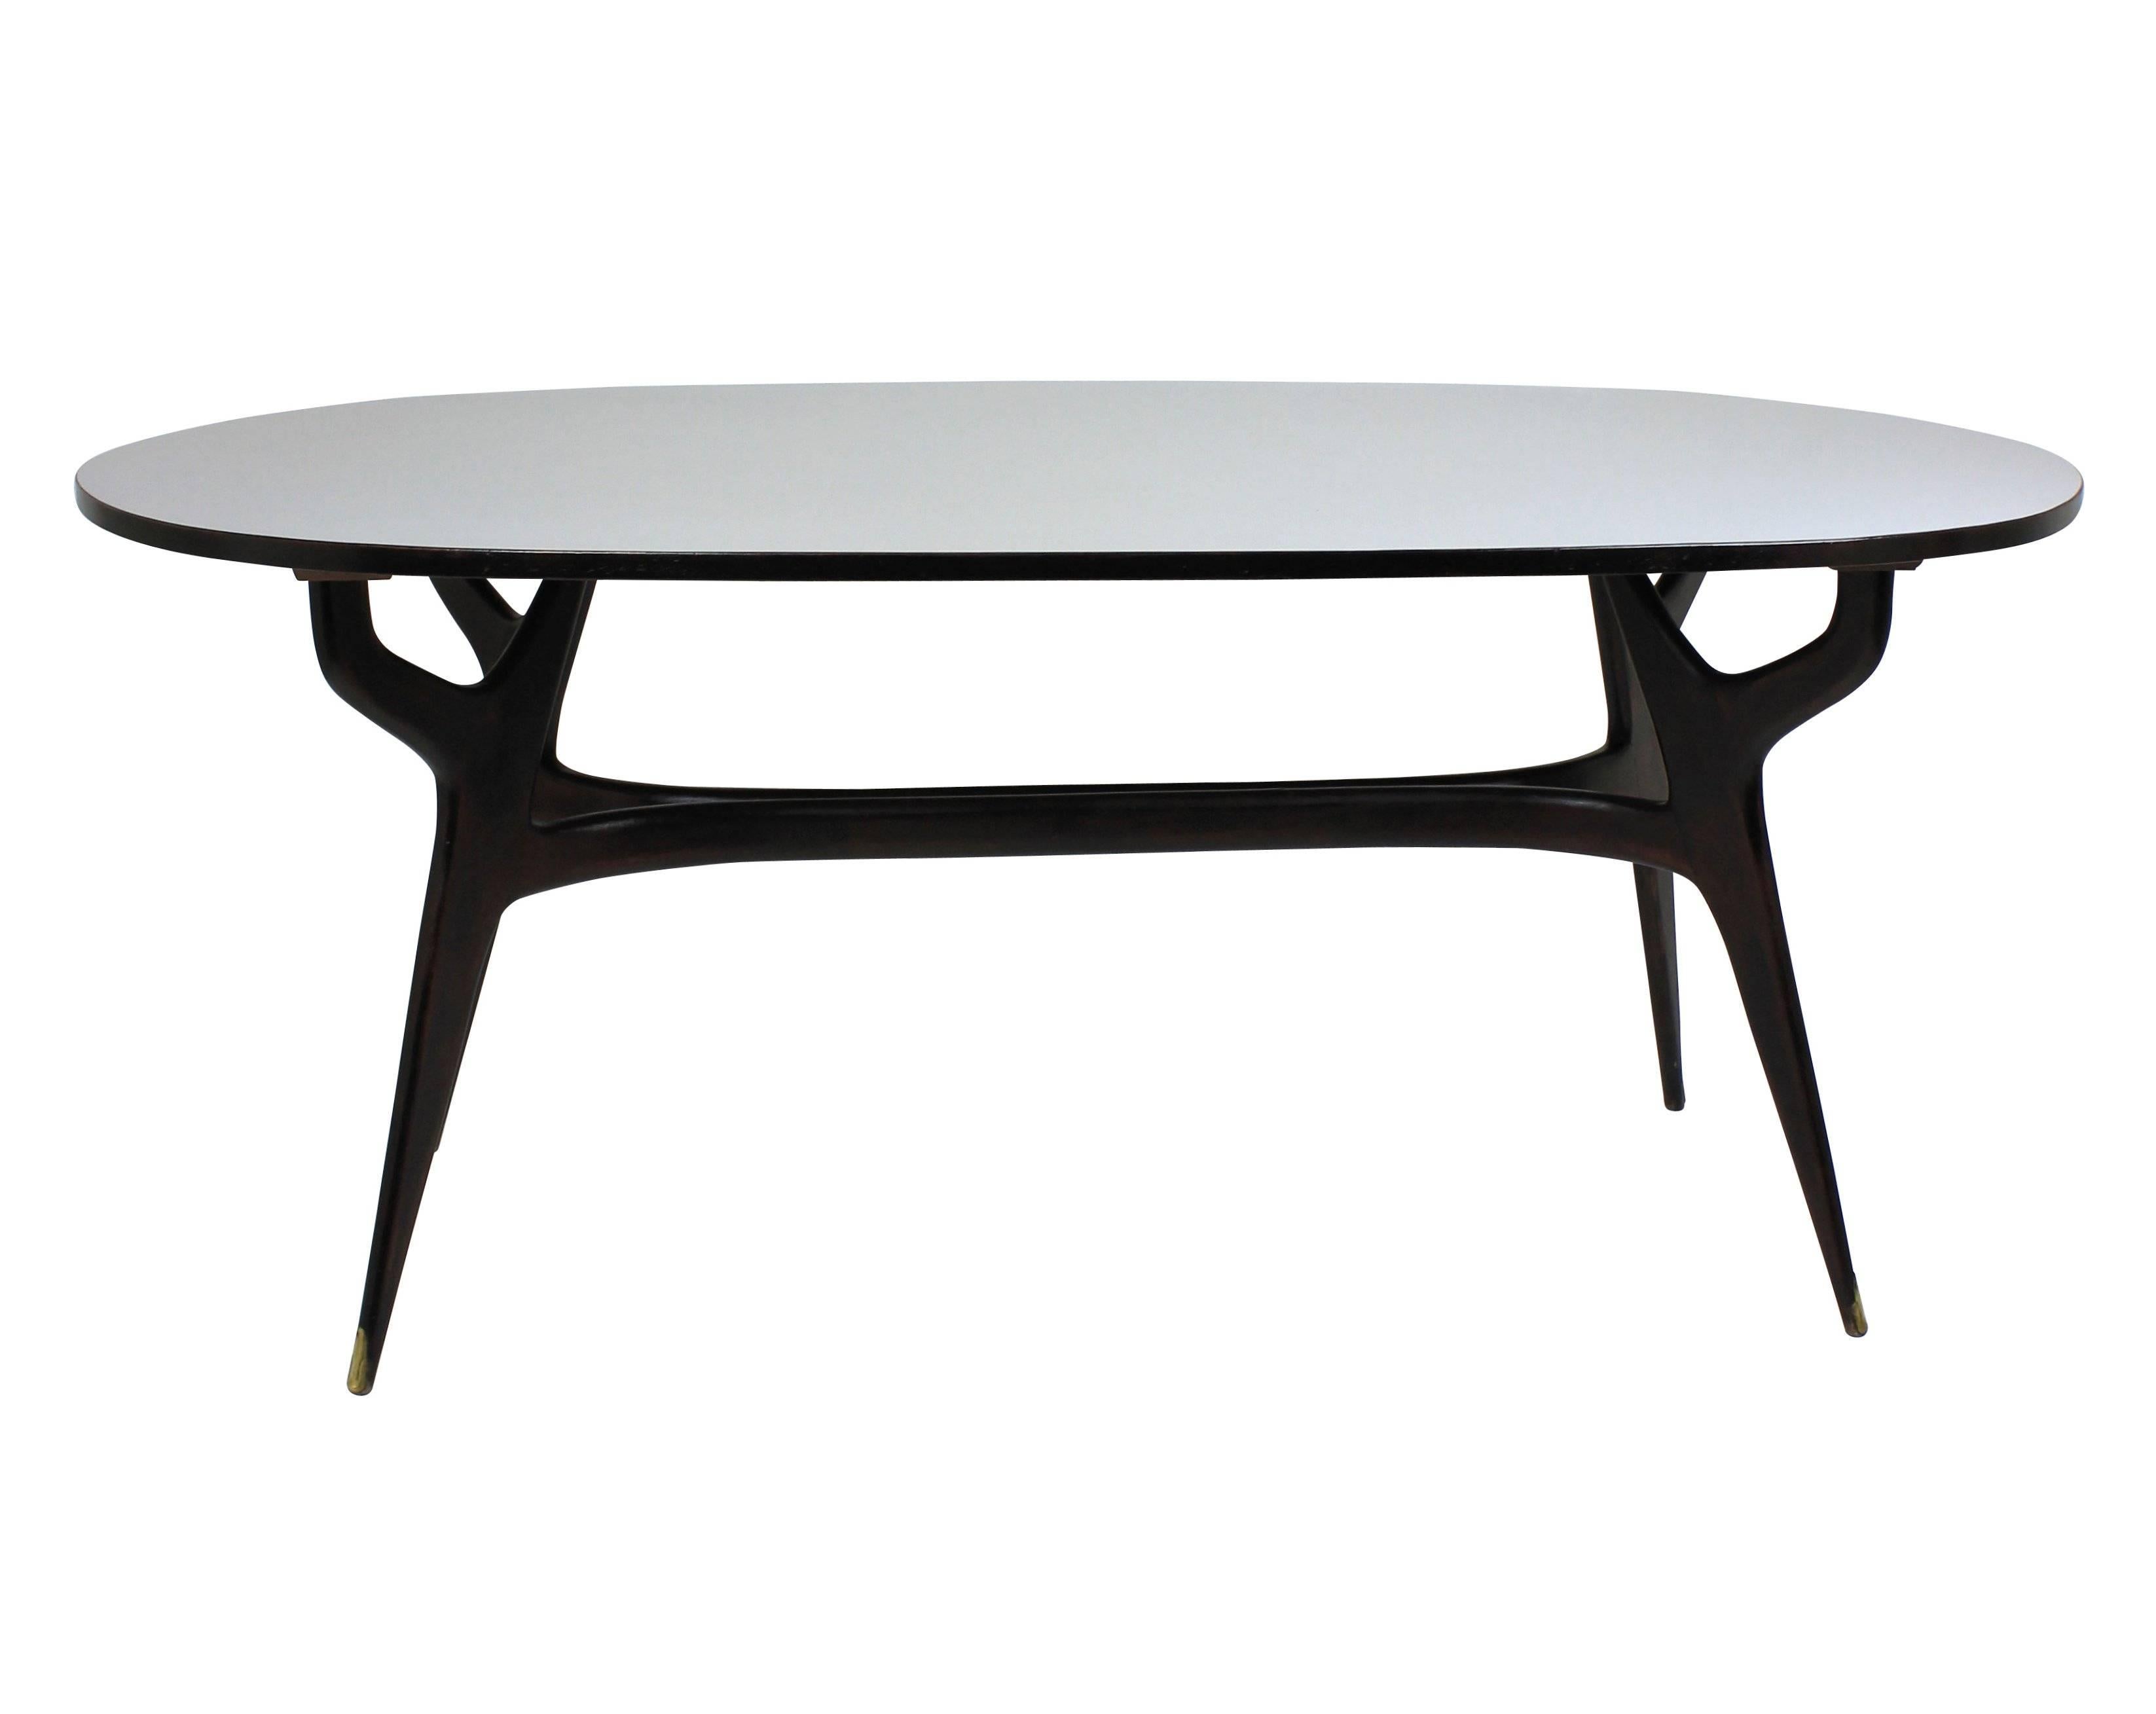 A sculptural dining table by Ico Parisi, in dark wood (not black) and with its original pale grey melamine top in great condition. With brass sabot feet.